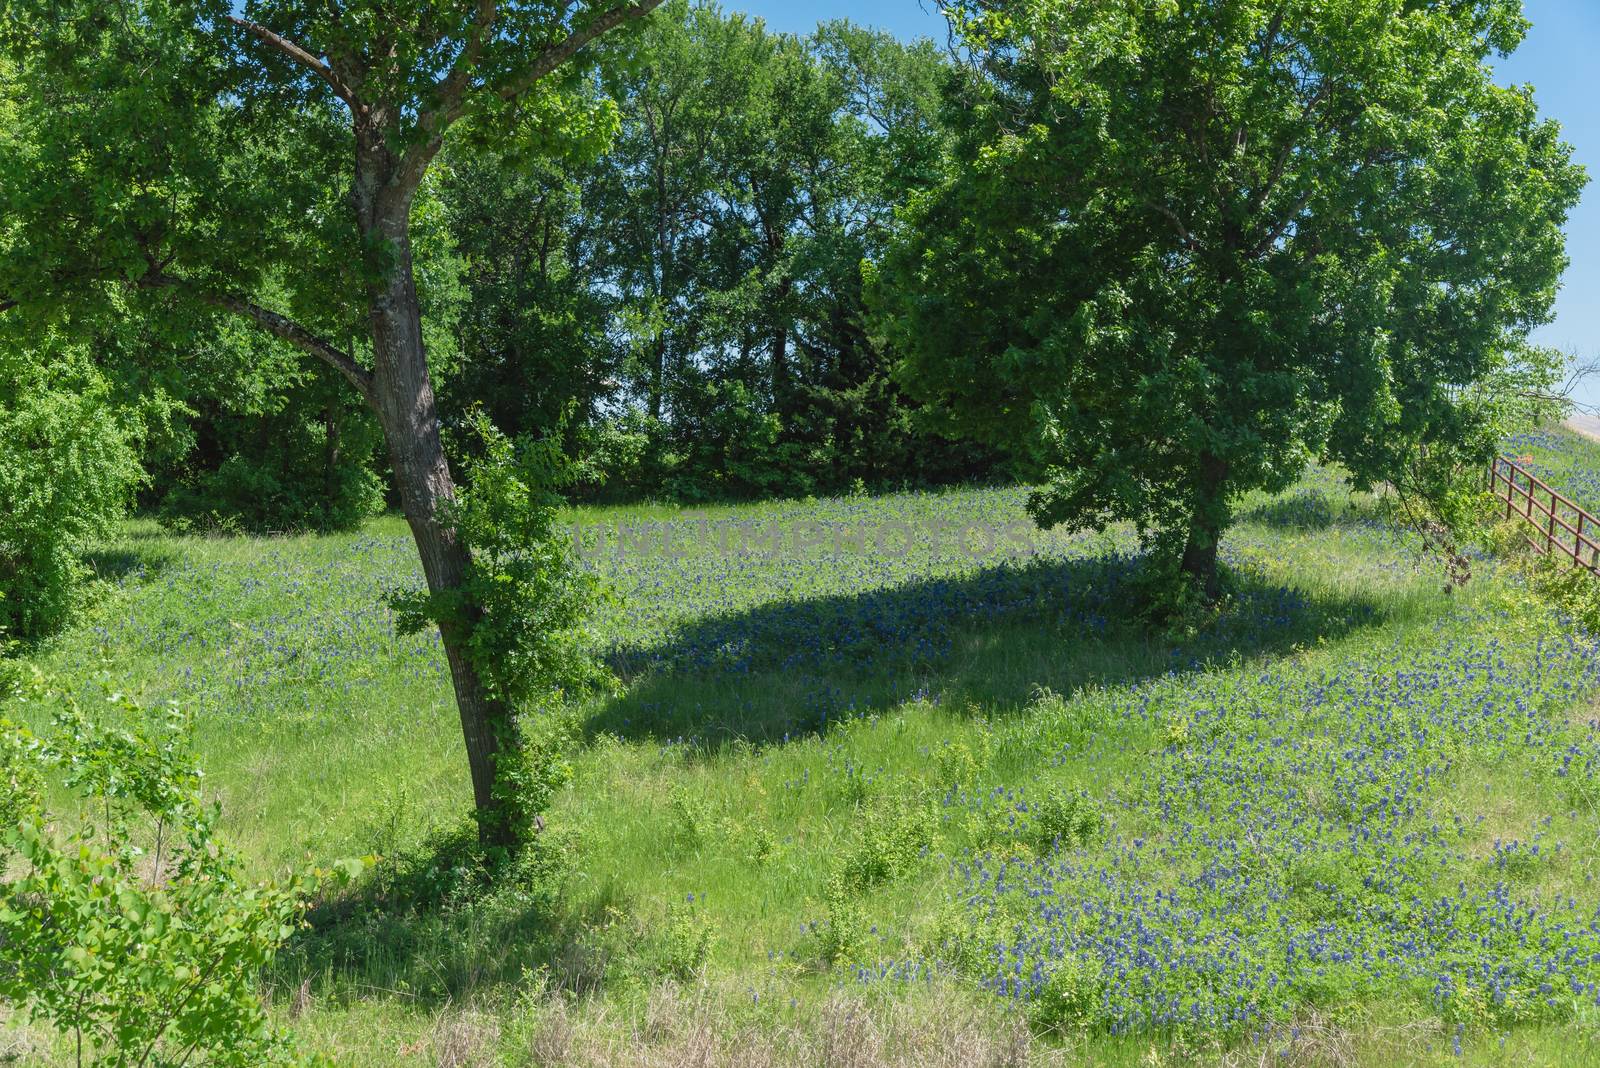 Scenic rural landscape from Bristol, Texas during springtime with blossom Bluebonnet wildflower